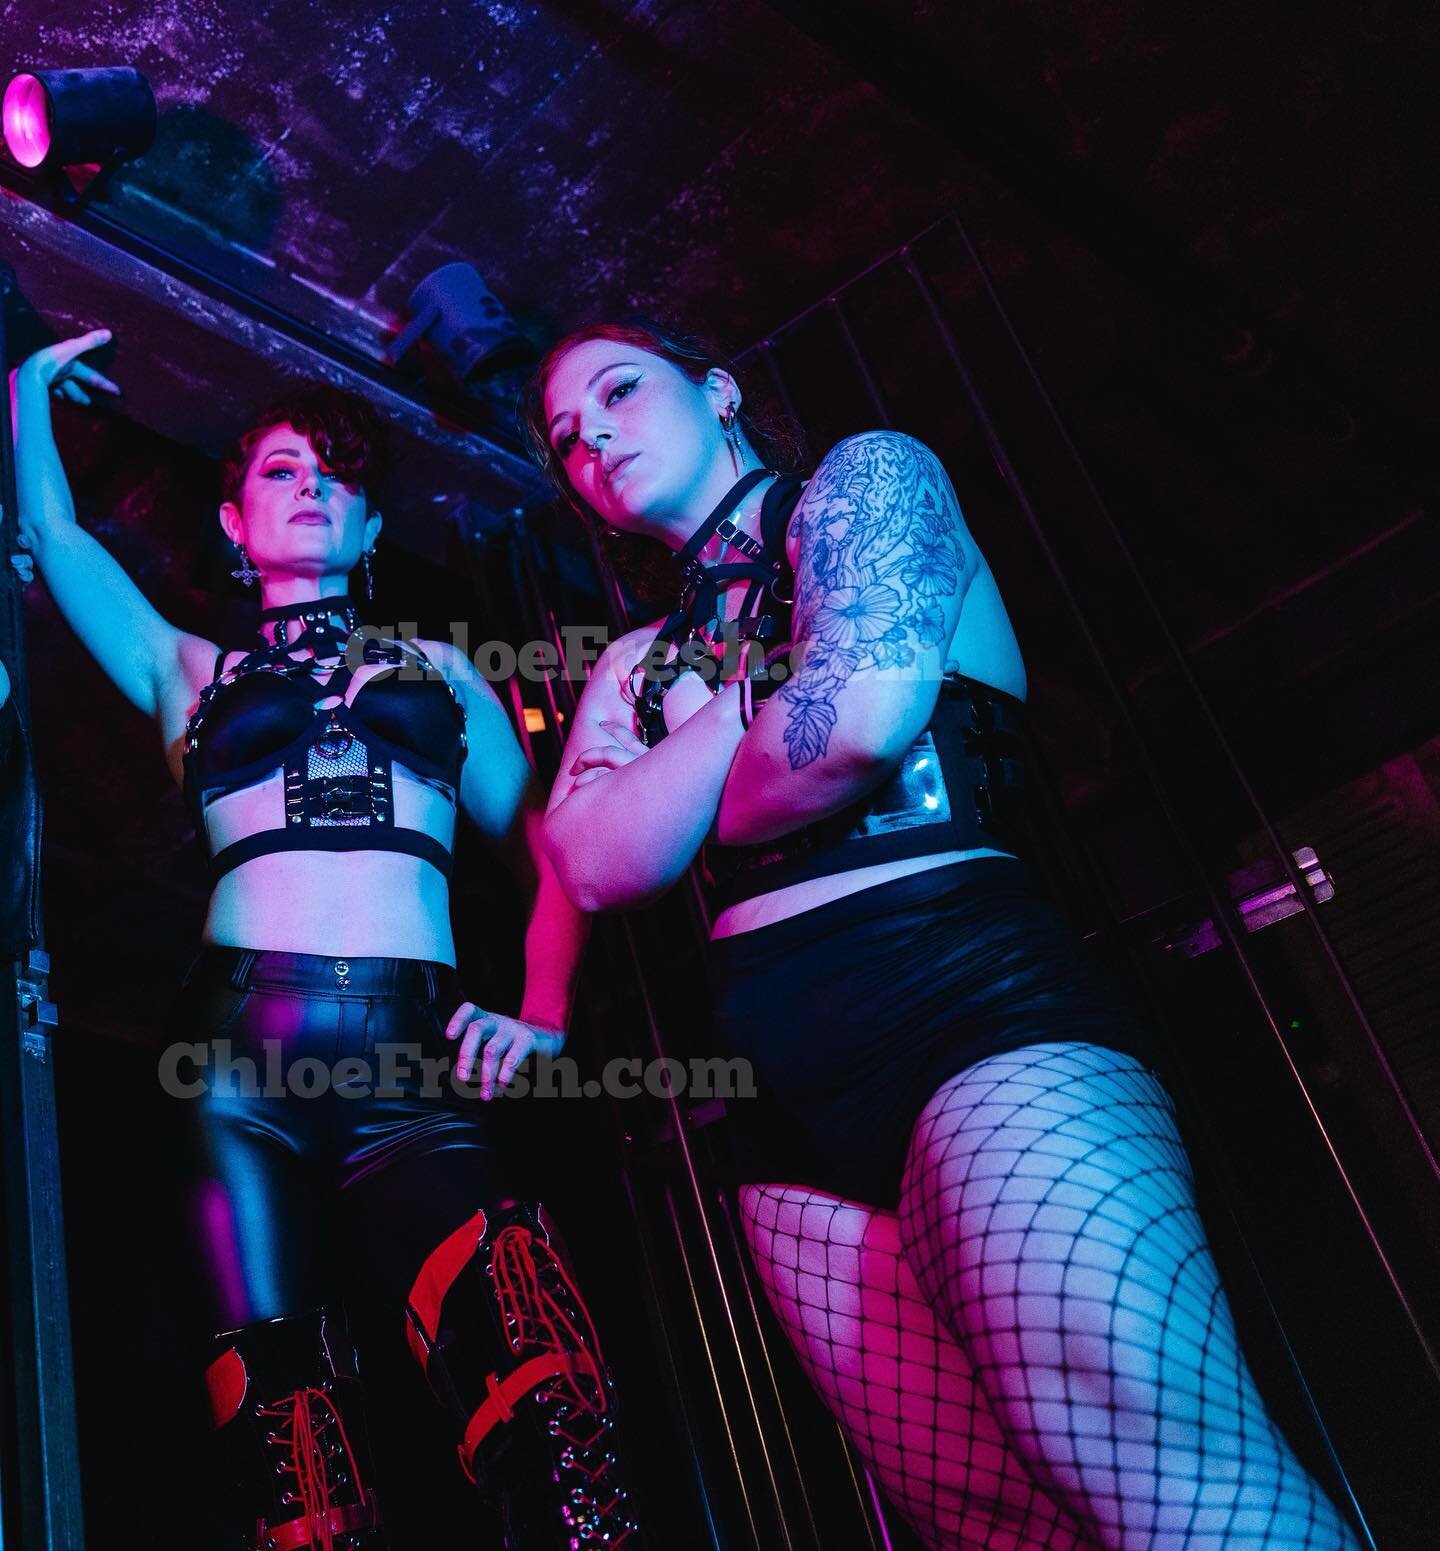 So many fun doubles with @fronksterfronk coming up this month! Don&rsquo;t miss your chance to serve TWO gorgeous Dominants at once 🖤 More info on my site! 

📸 @rosiesimmons